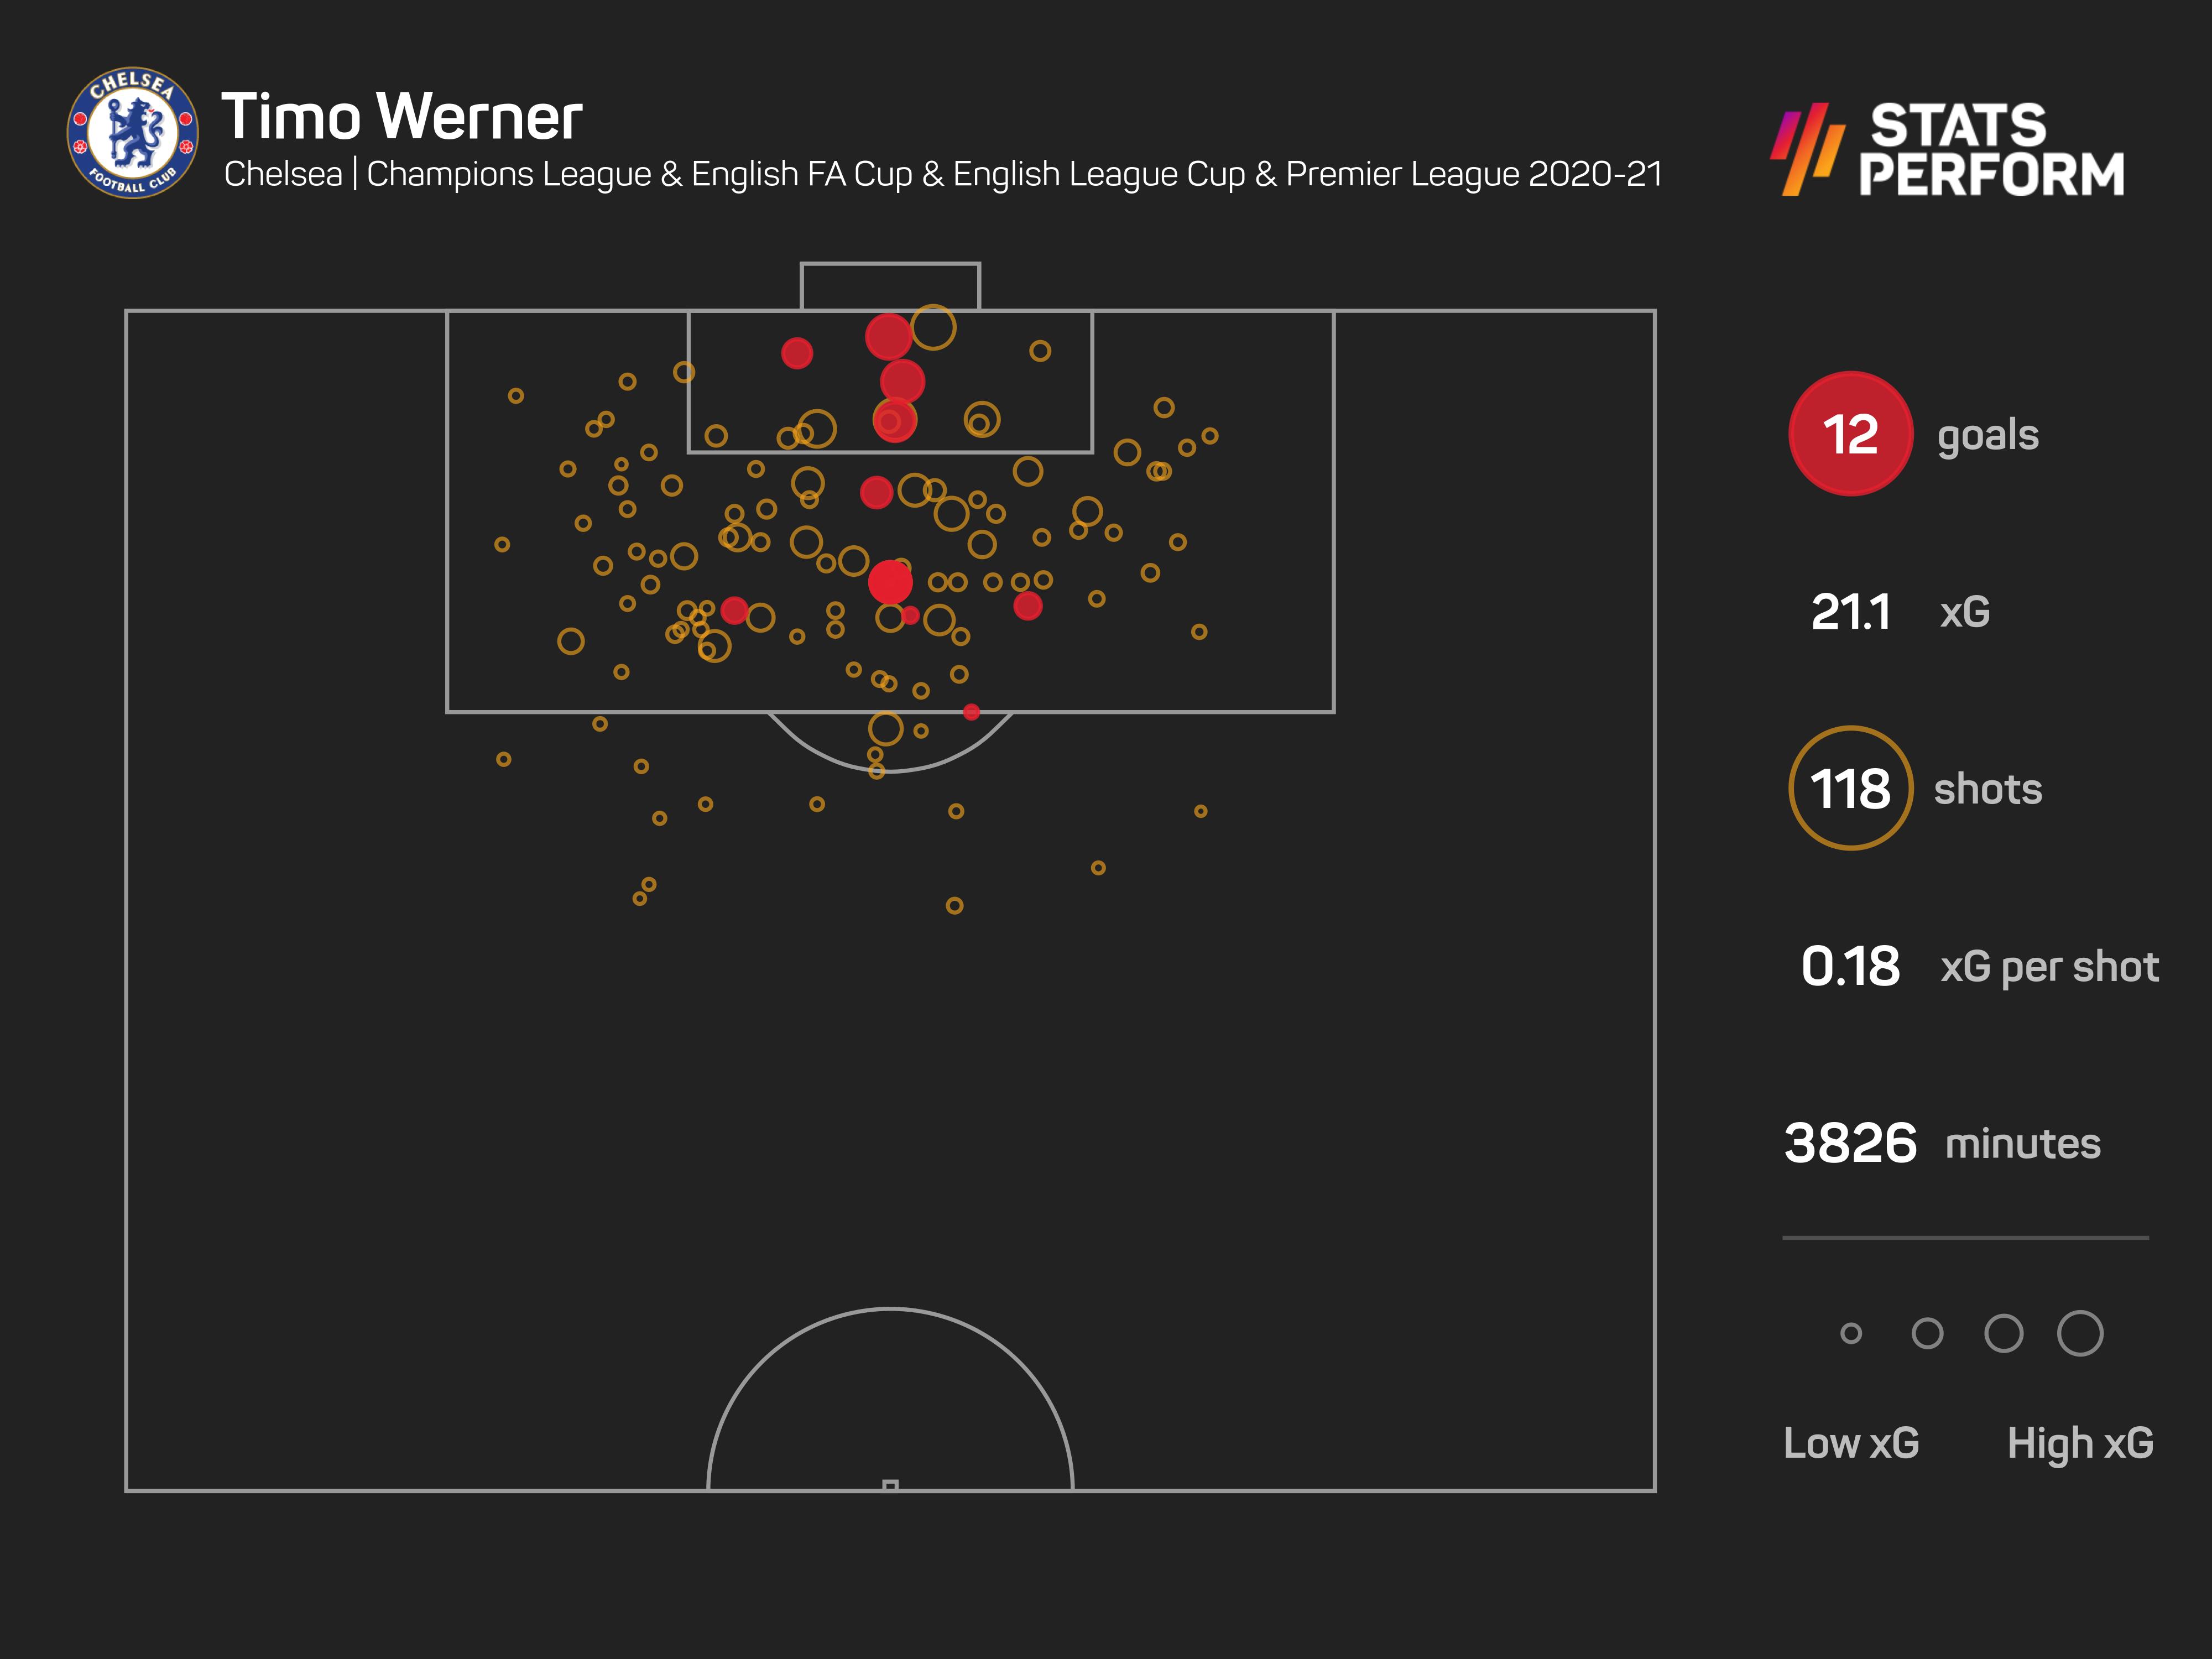 Timo Werner's 2020-21 form for Chelsea